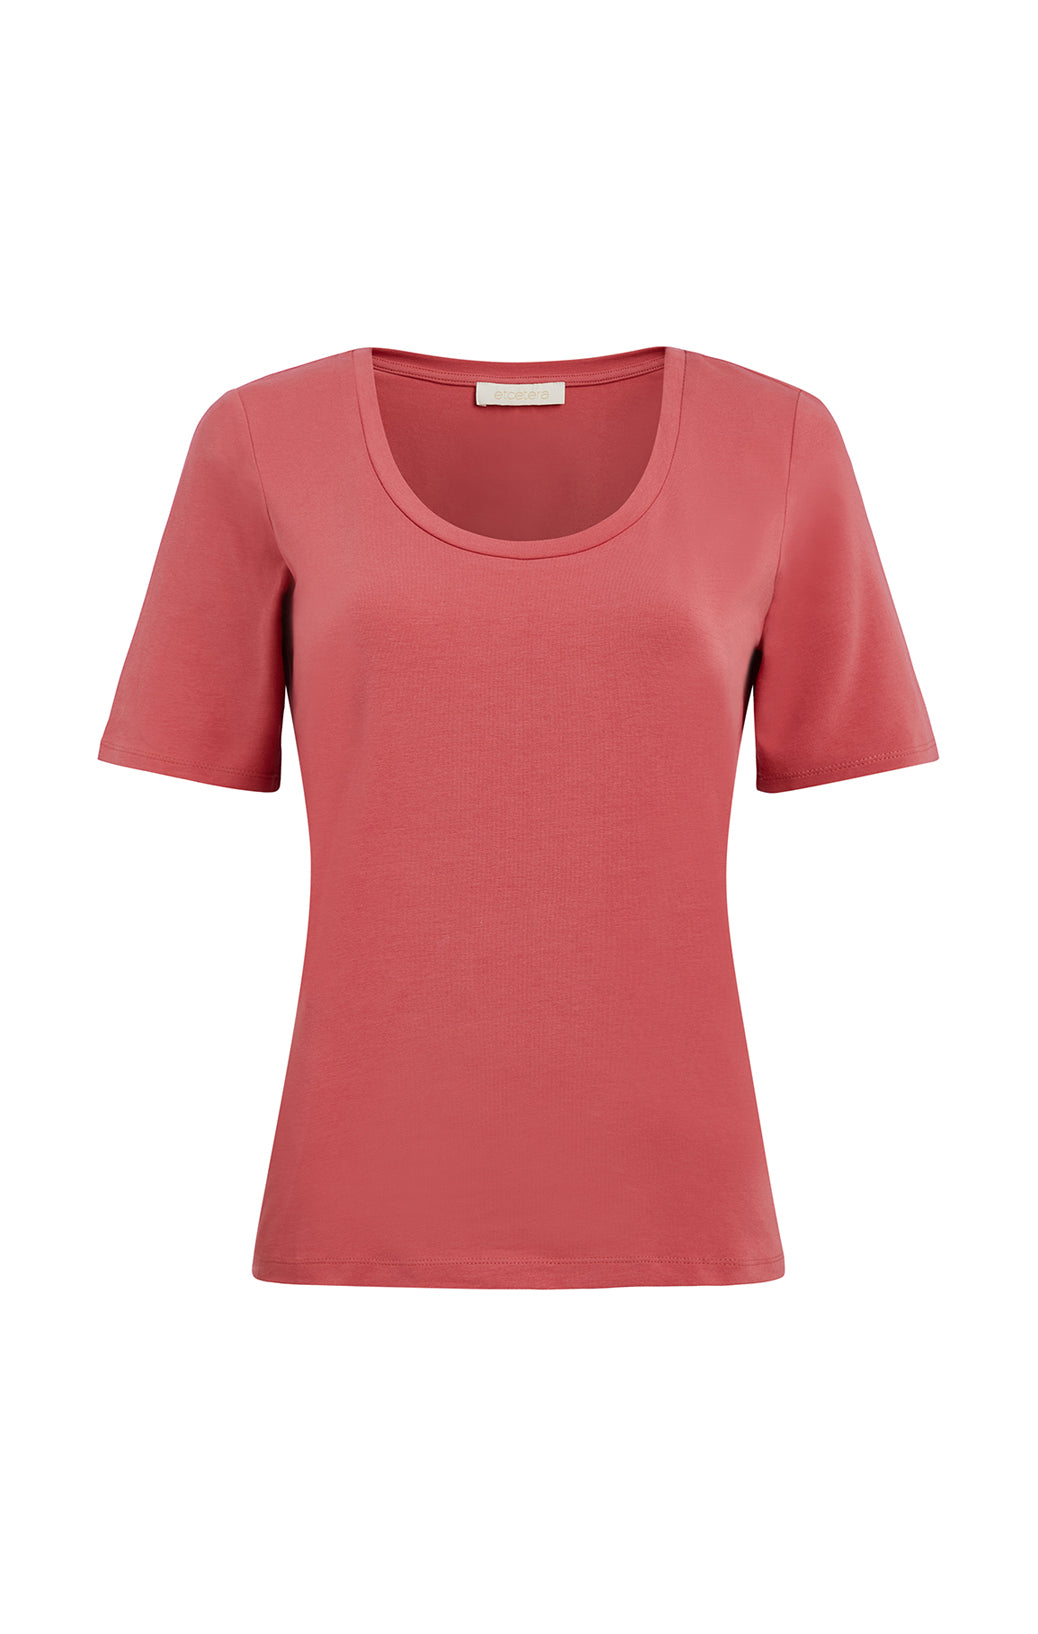 Tuscany-Dkbl - Stretch Cotton Jersey Scoop-Neck Tee - Product Image